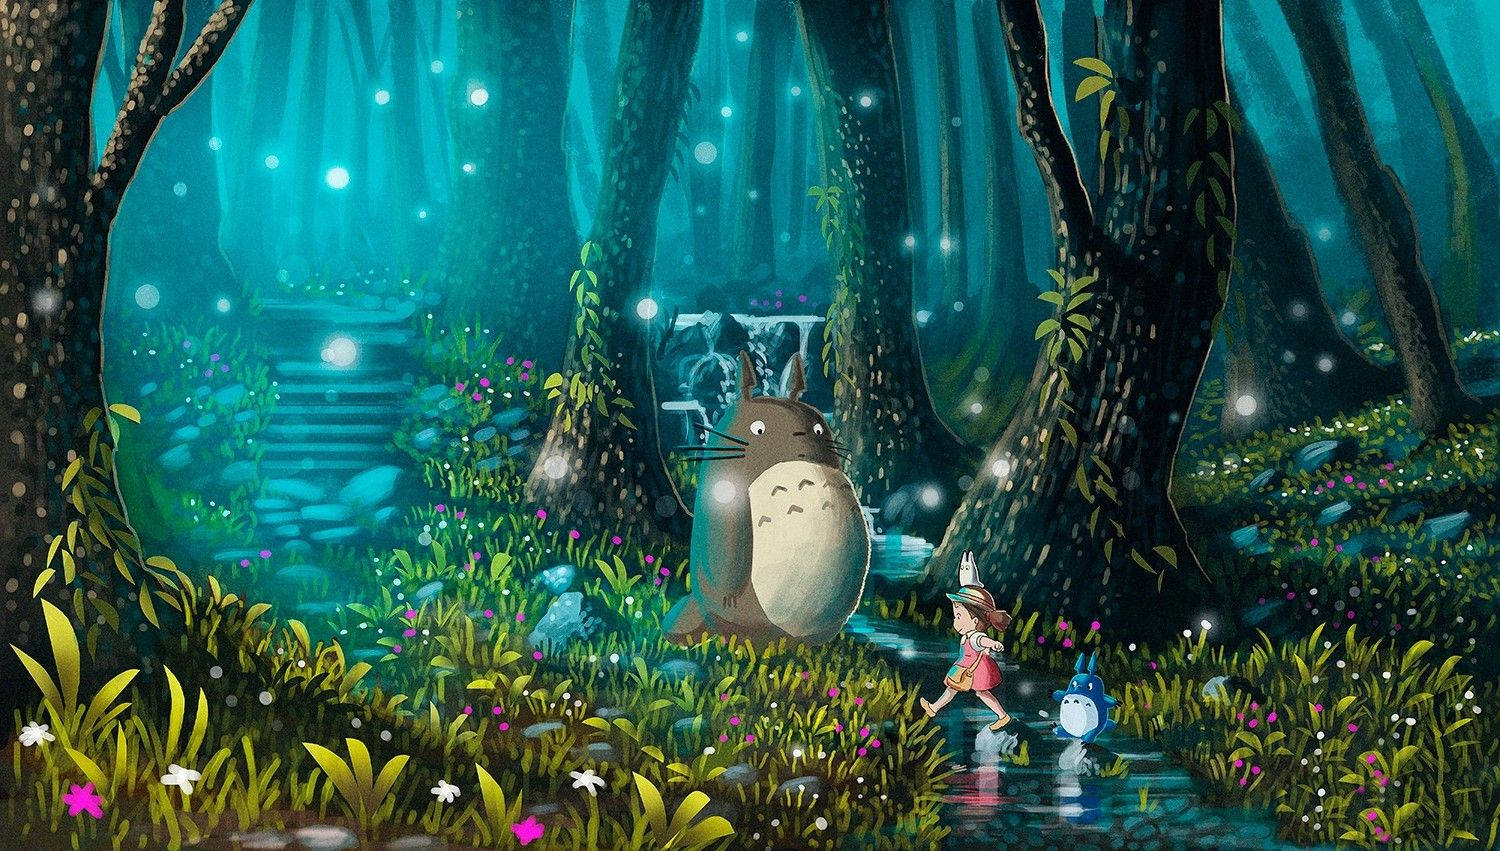 "Let's explore the magical world of Totoro!" Wallpaper